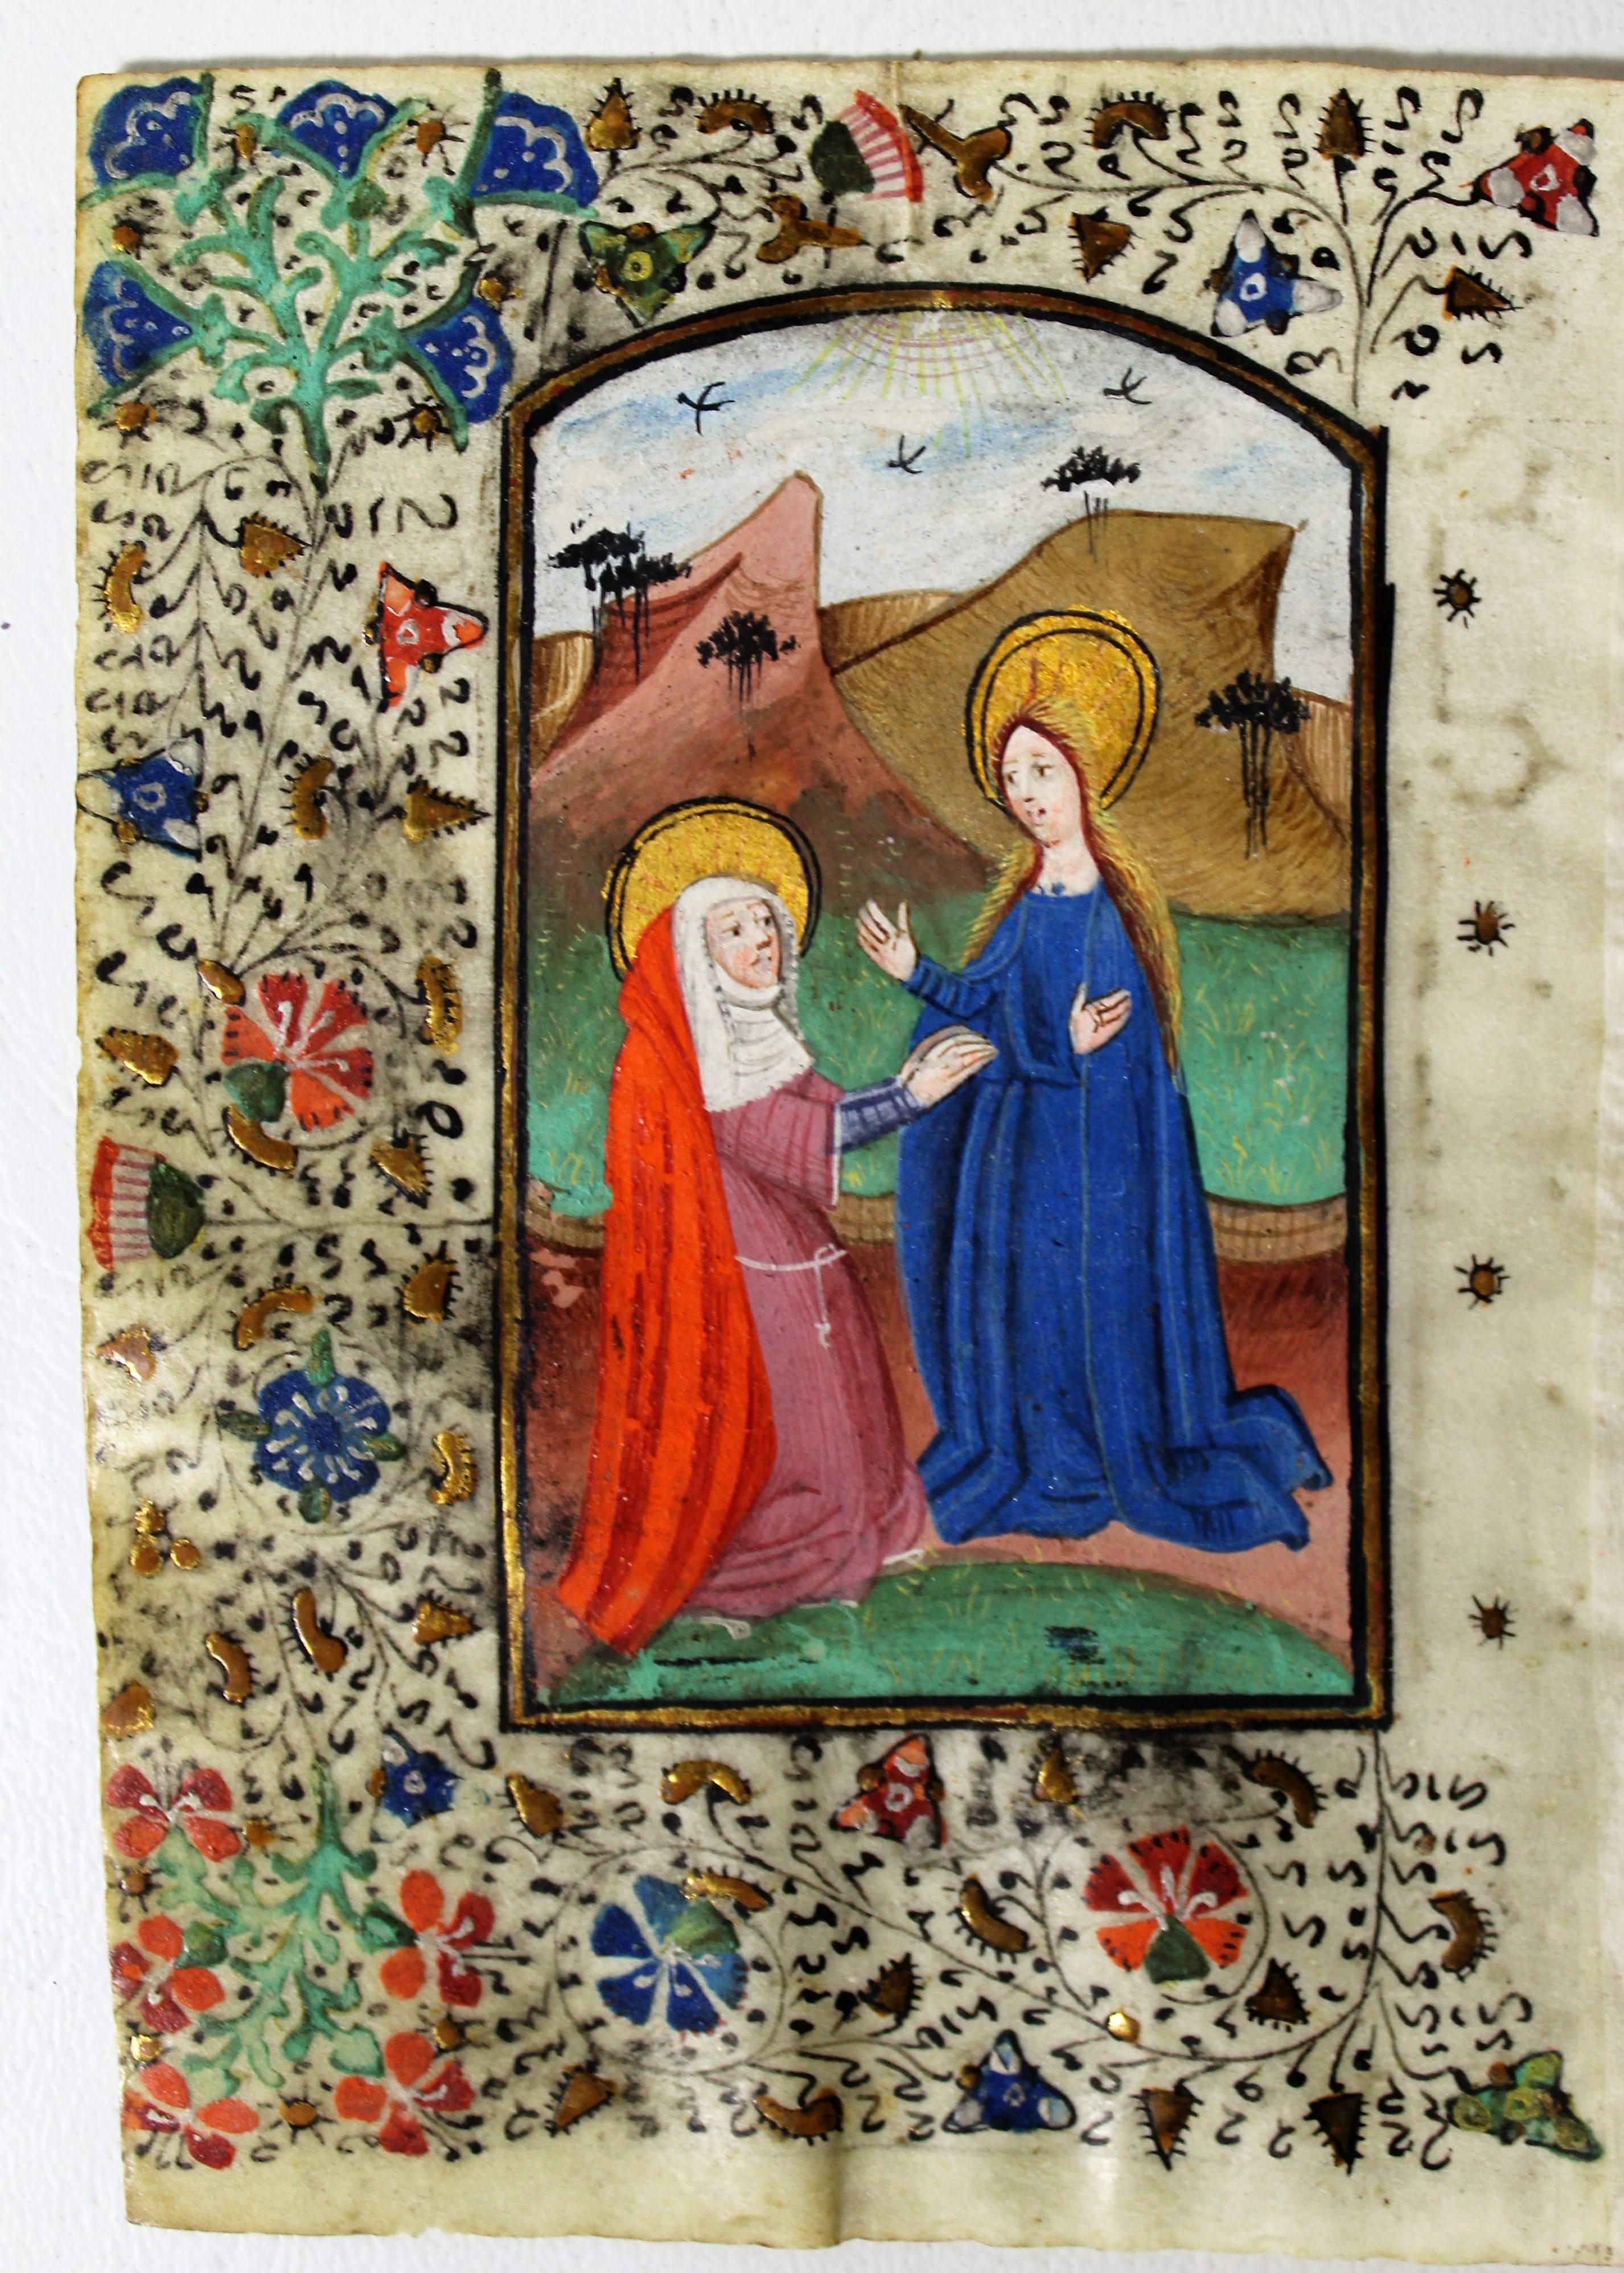 Exquisite illuminated manuscript and portrait miniature from a 15th century Dutch Book of Hours. This bifolium opens to feature a fantastic miniature painting of the Virgin Mary in an arched compartment. The text opens up a morning prayer known as